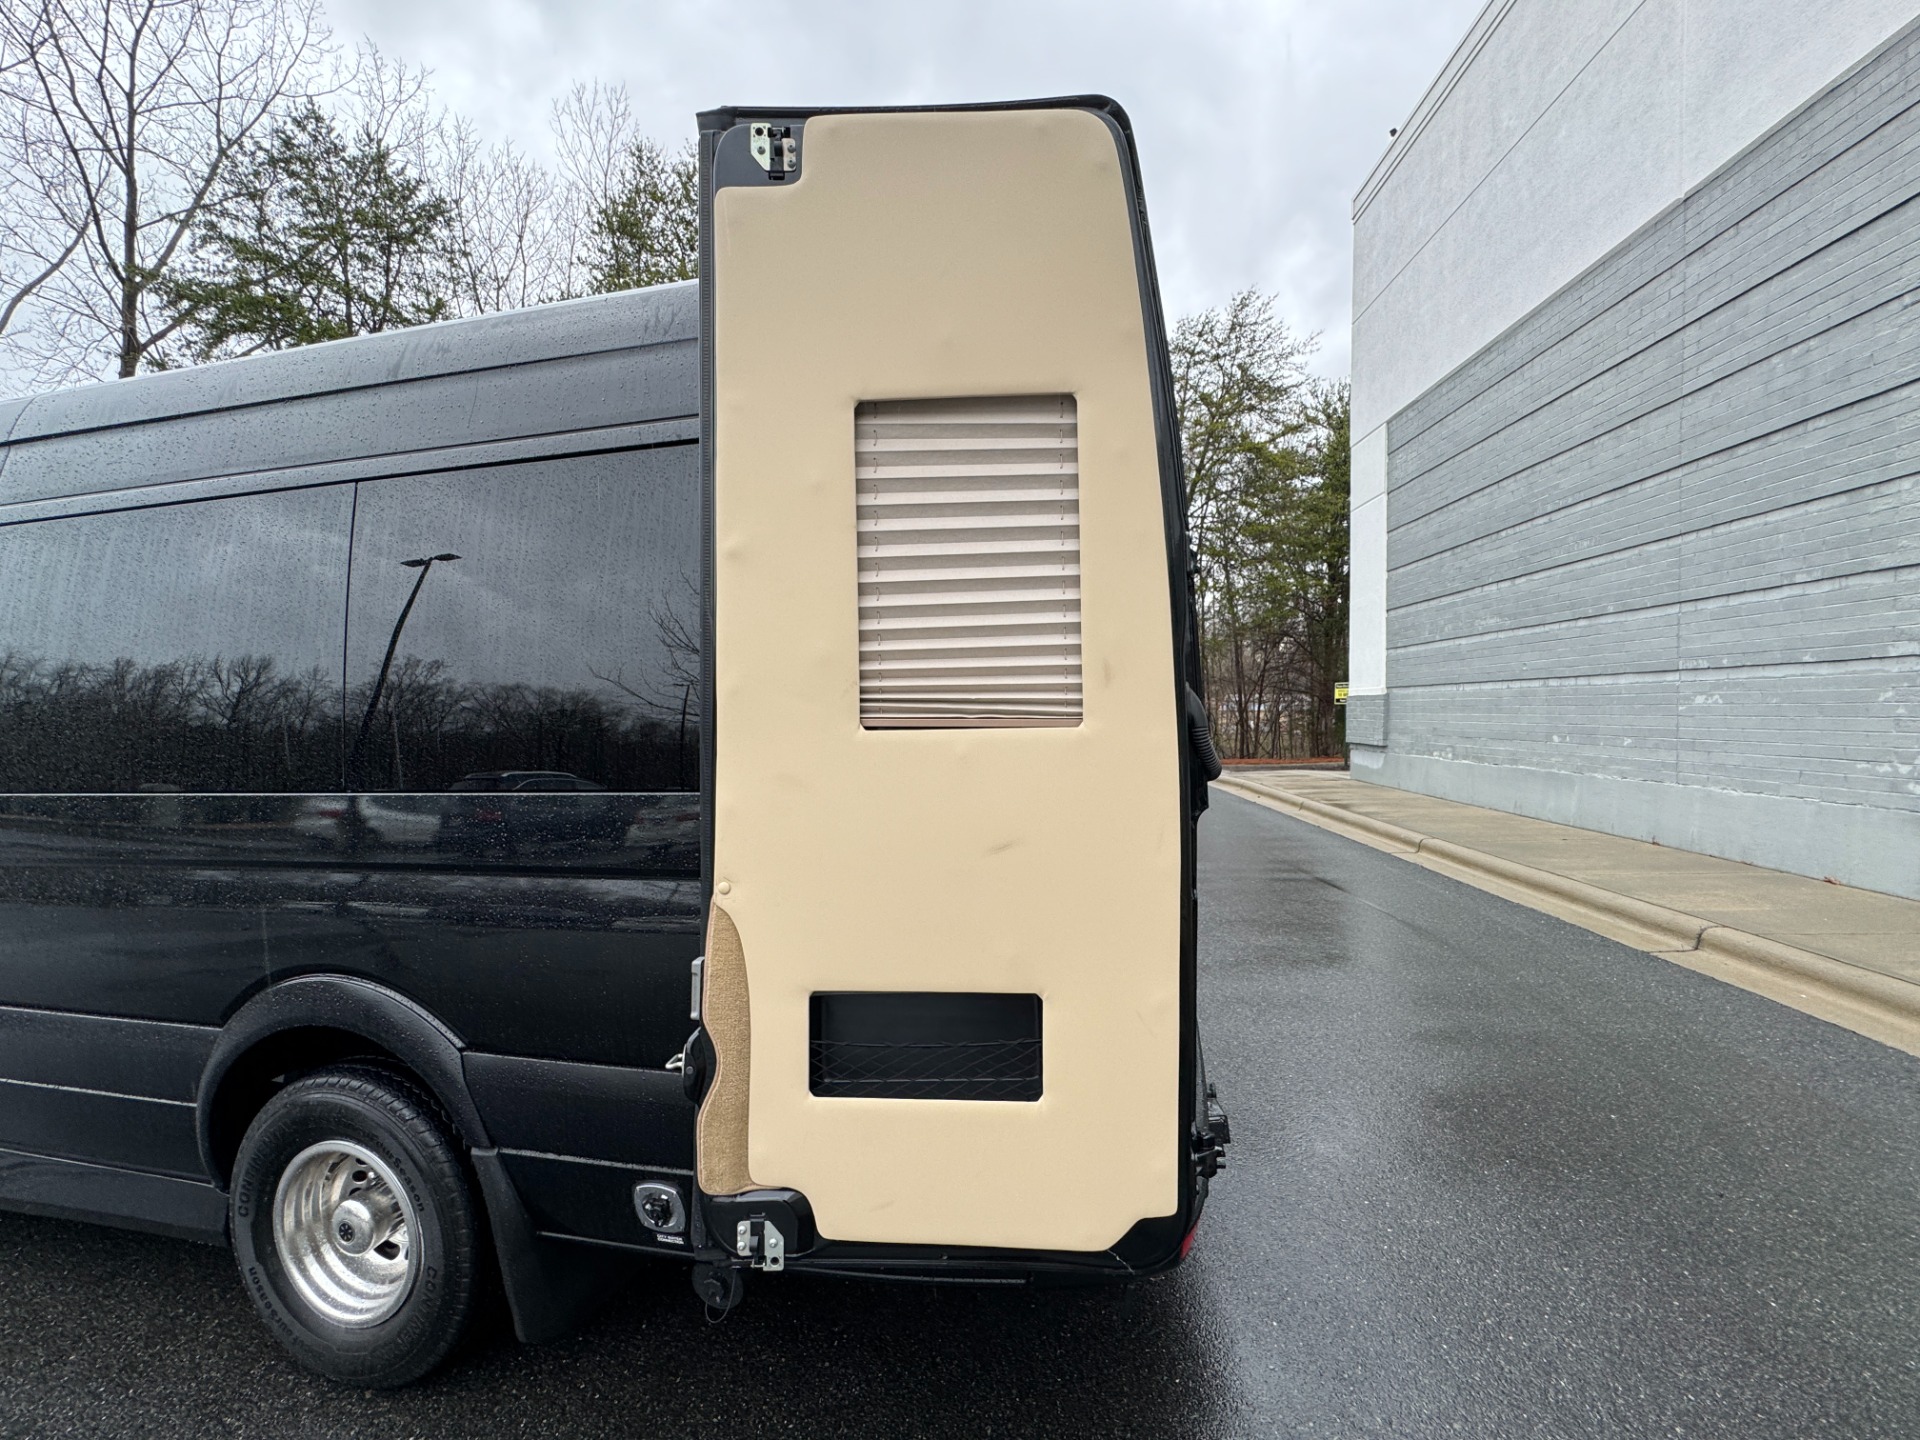 Used 2017 Mercedes-Benz Sprinter Cargo Van MIDWEST JET VAN CONVERSION for sale $120,000 at Formula Imports in Charlotte NC 28227 77